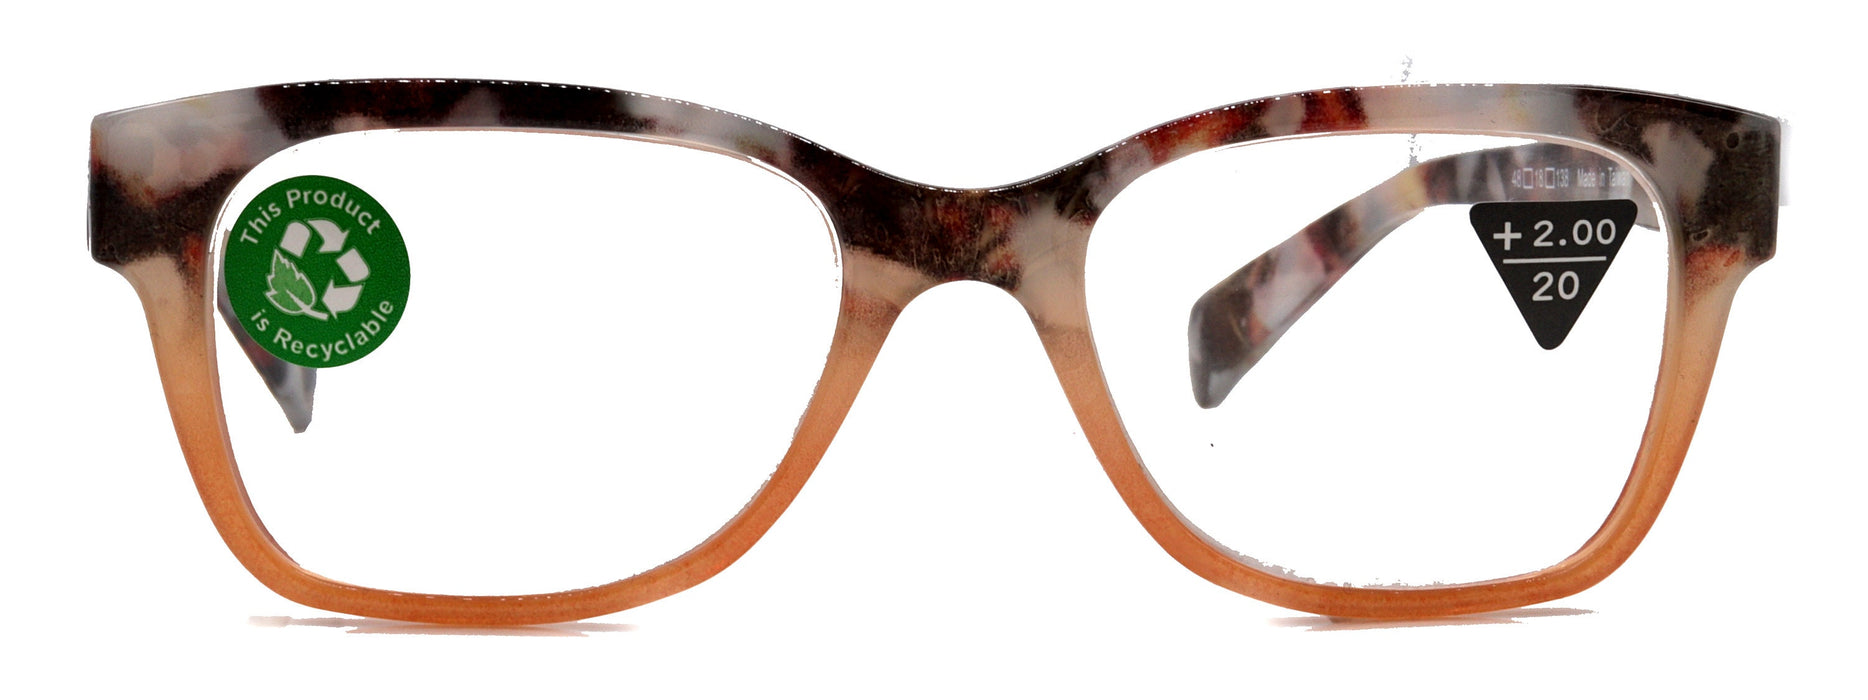 Aya, (Premium) Reading Glasses, High End Fashion Reader,+1.25 to +4 Magnifiers, (Tan n Brown Tortoise) Square Frame. NY Fifth Avenue.